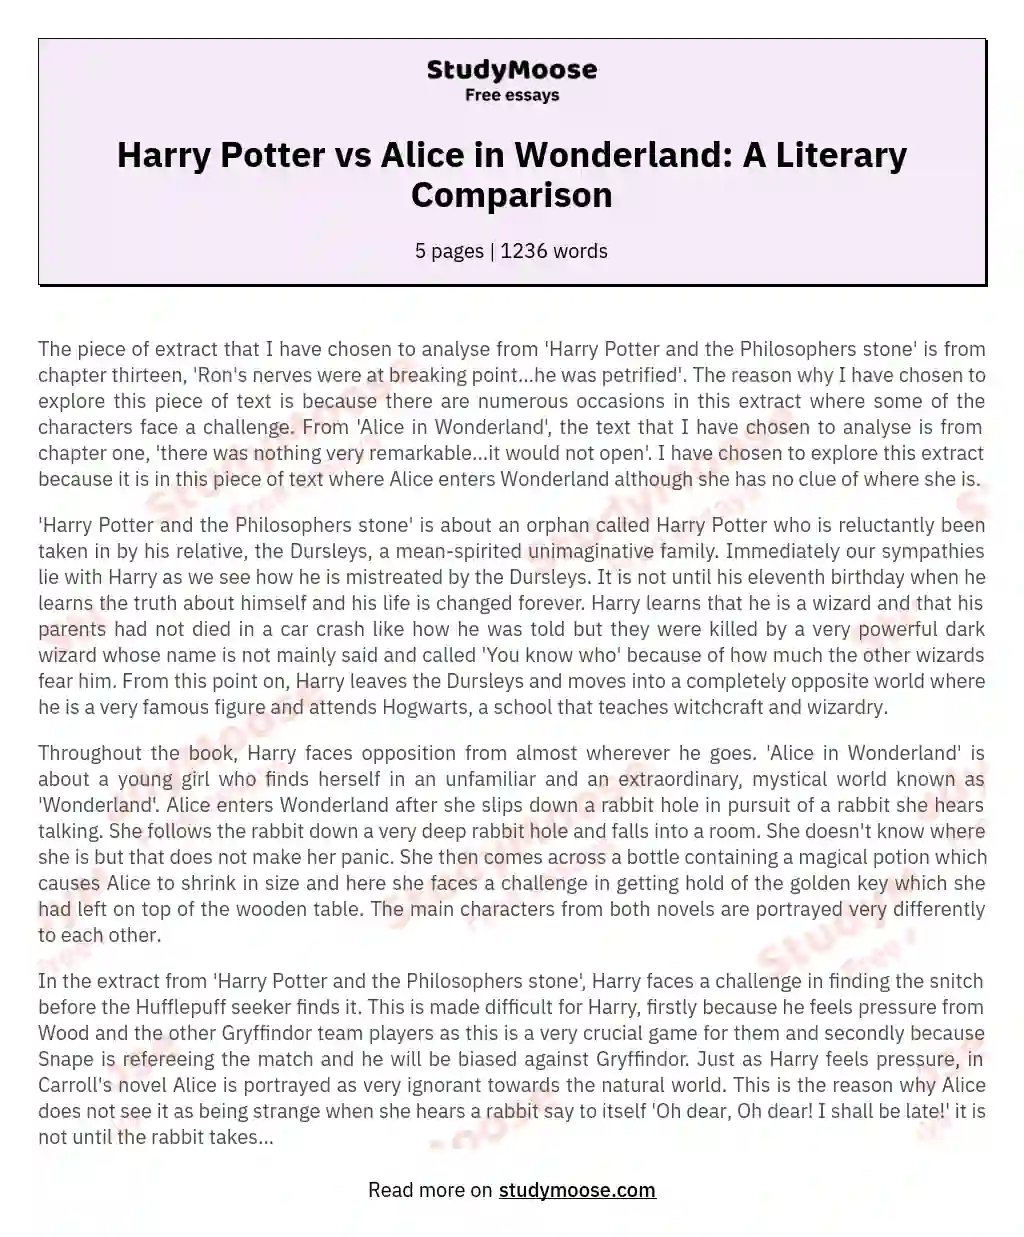 Comparison of 'Harry Potter and the philosopher's stone' and 'Alice in Wonderland'